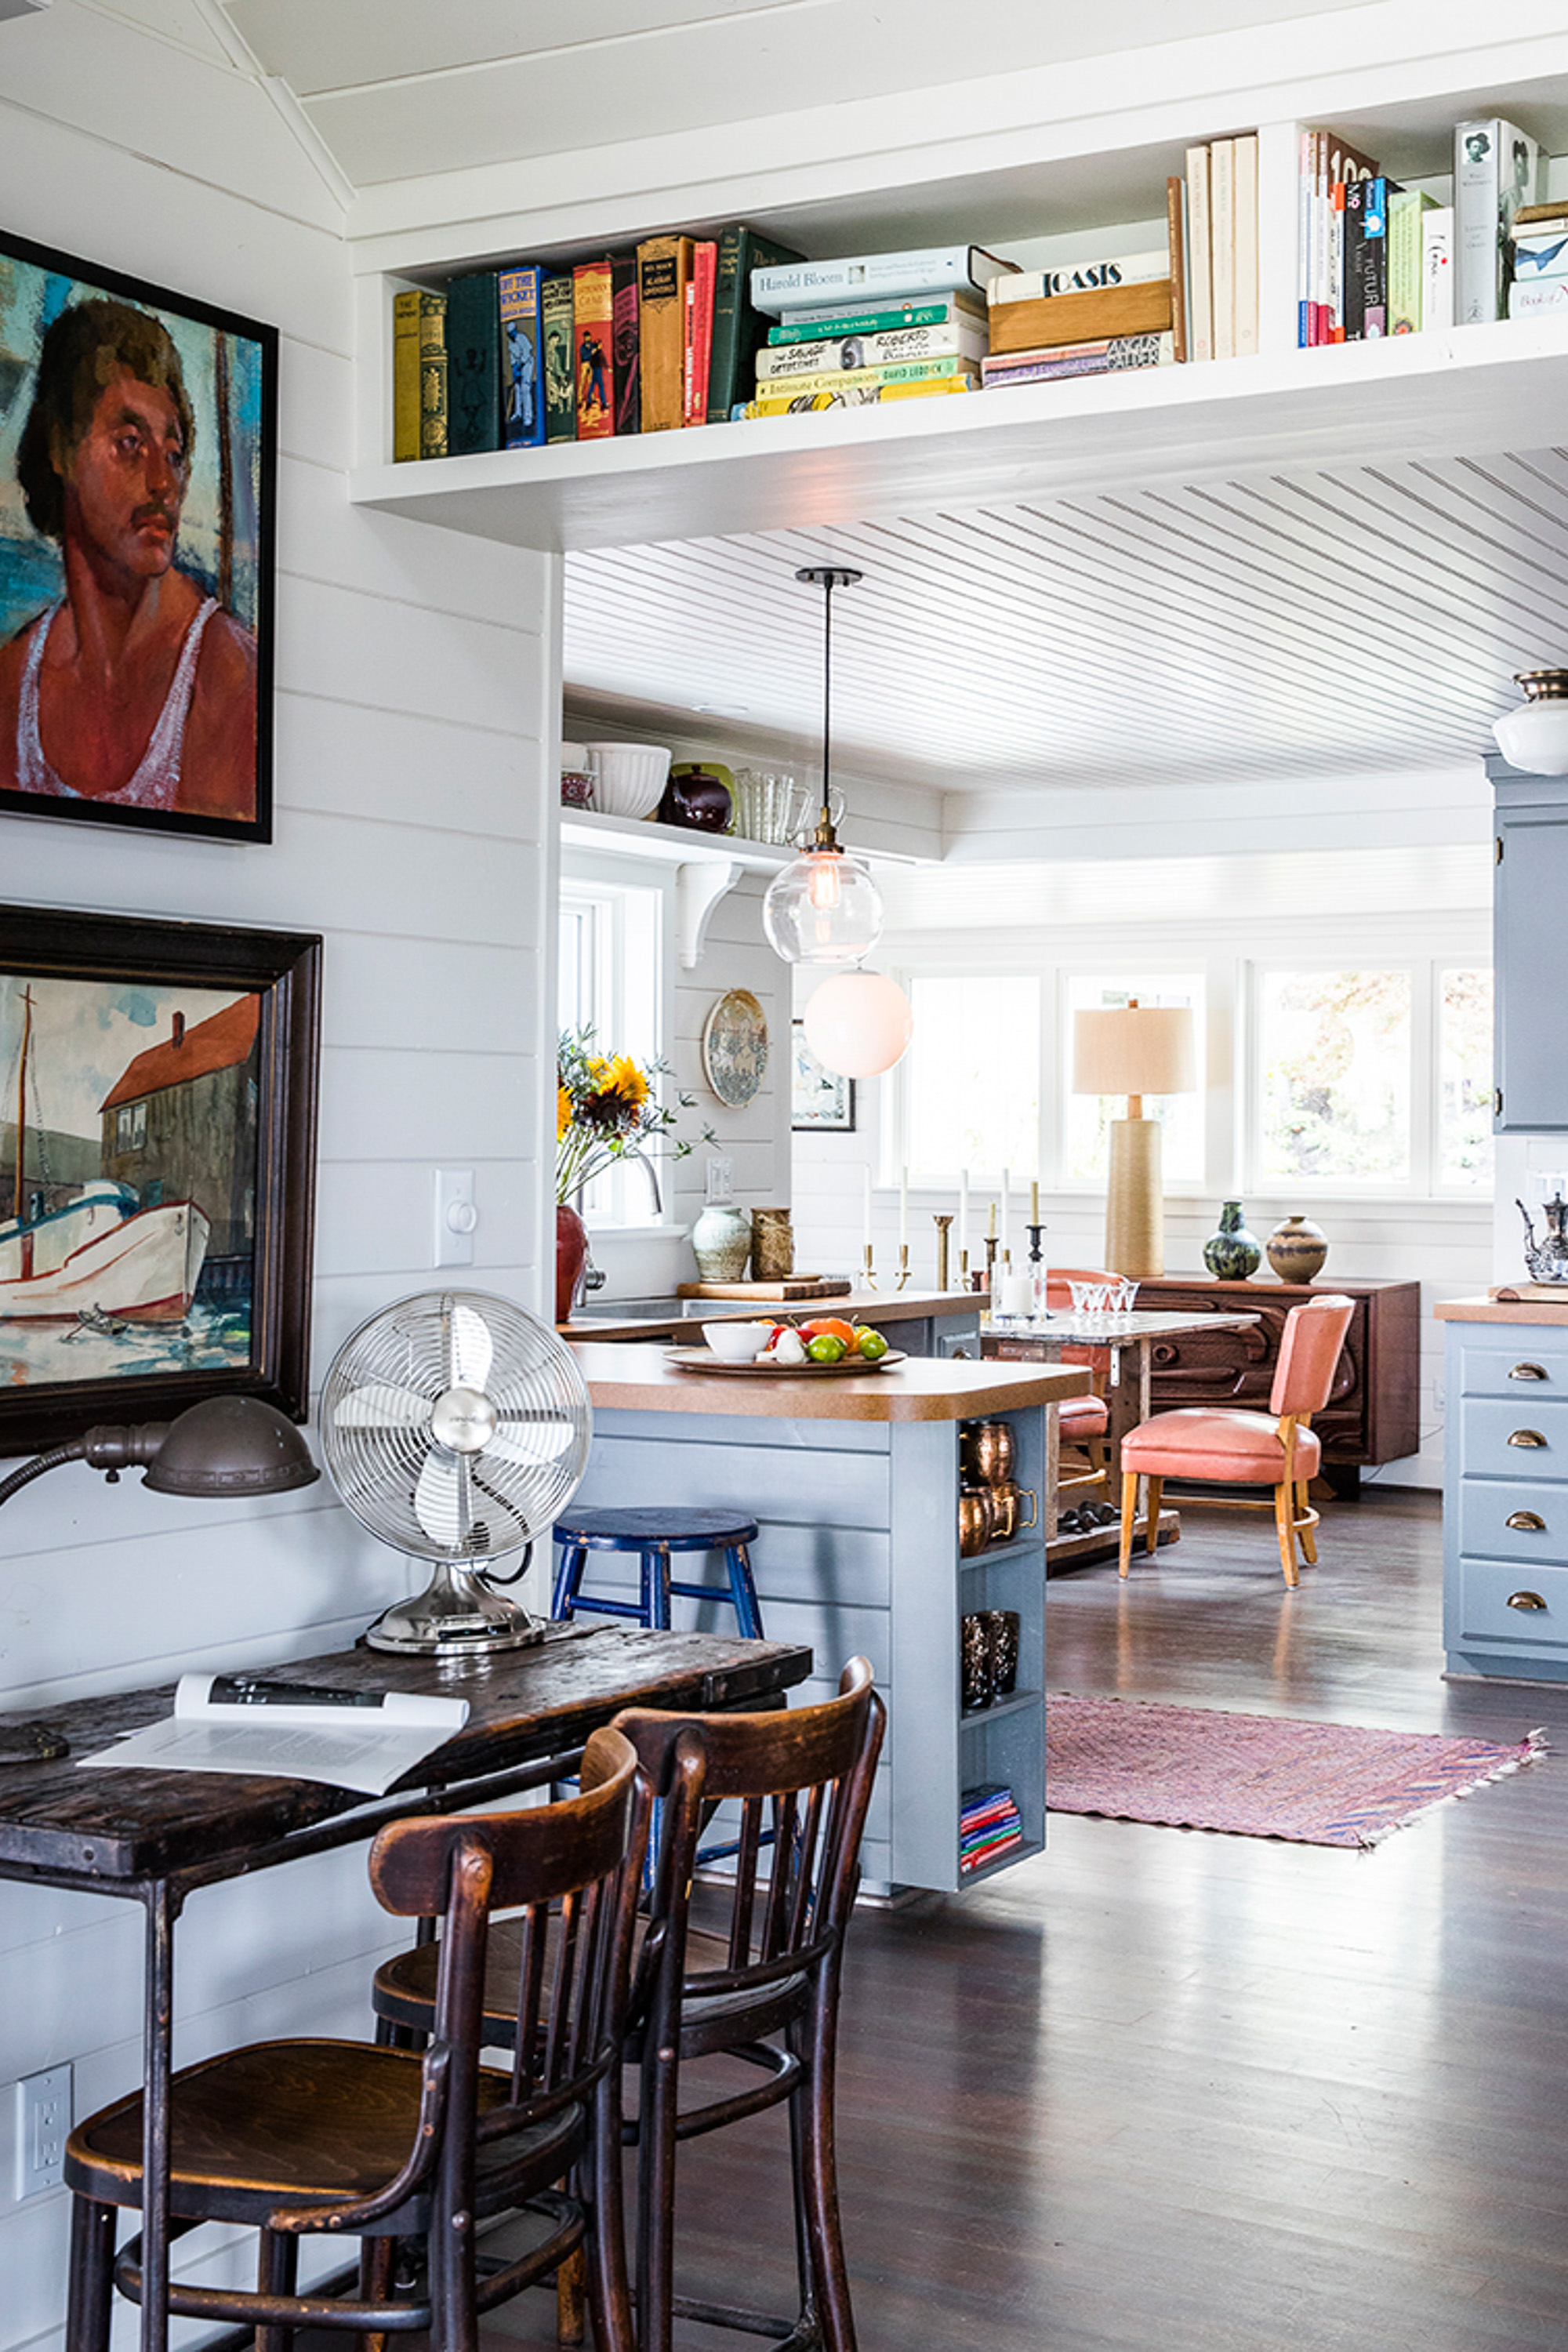 The kitchen retains its 1950s cabinets painted in a gray-blue hue, complemented by aged brass hardware for a sea-captain vibe. Formica countertops offer a nostalgic nod to old beach cottages.